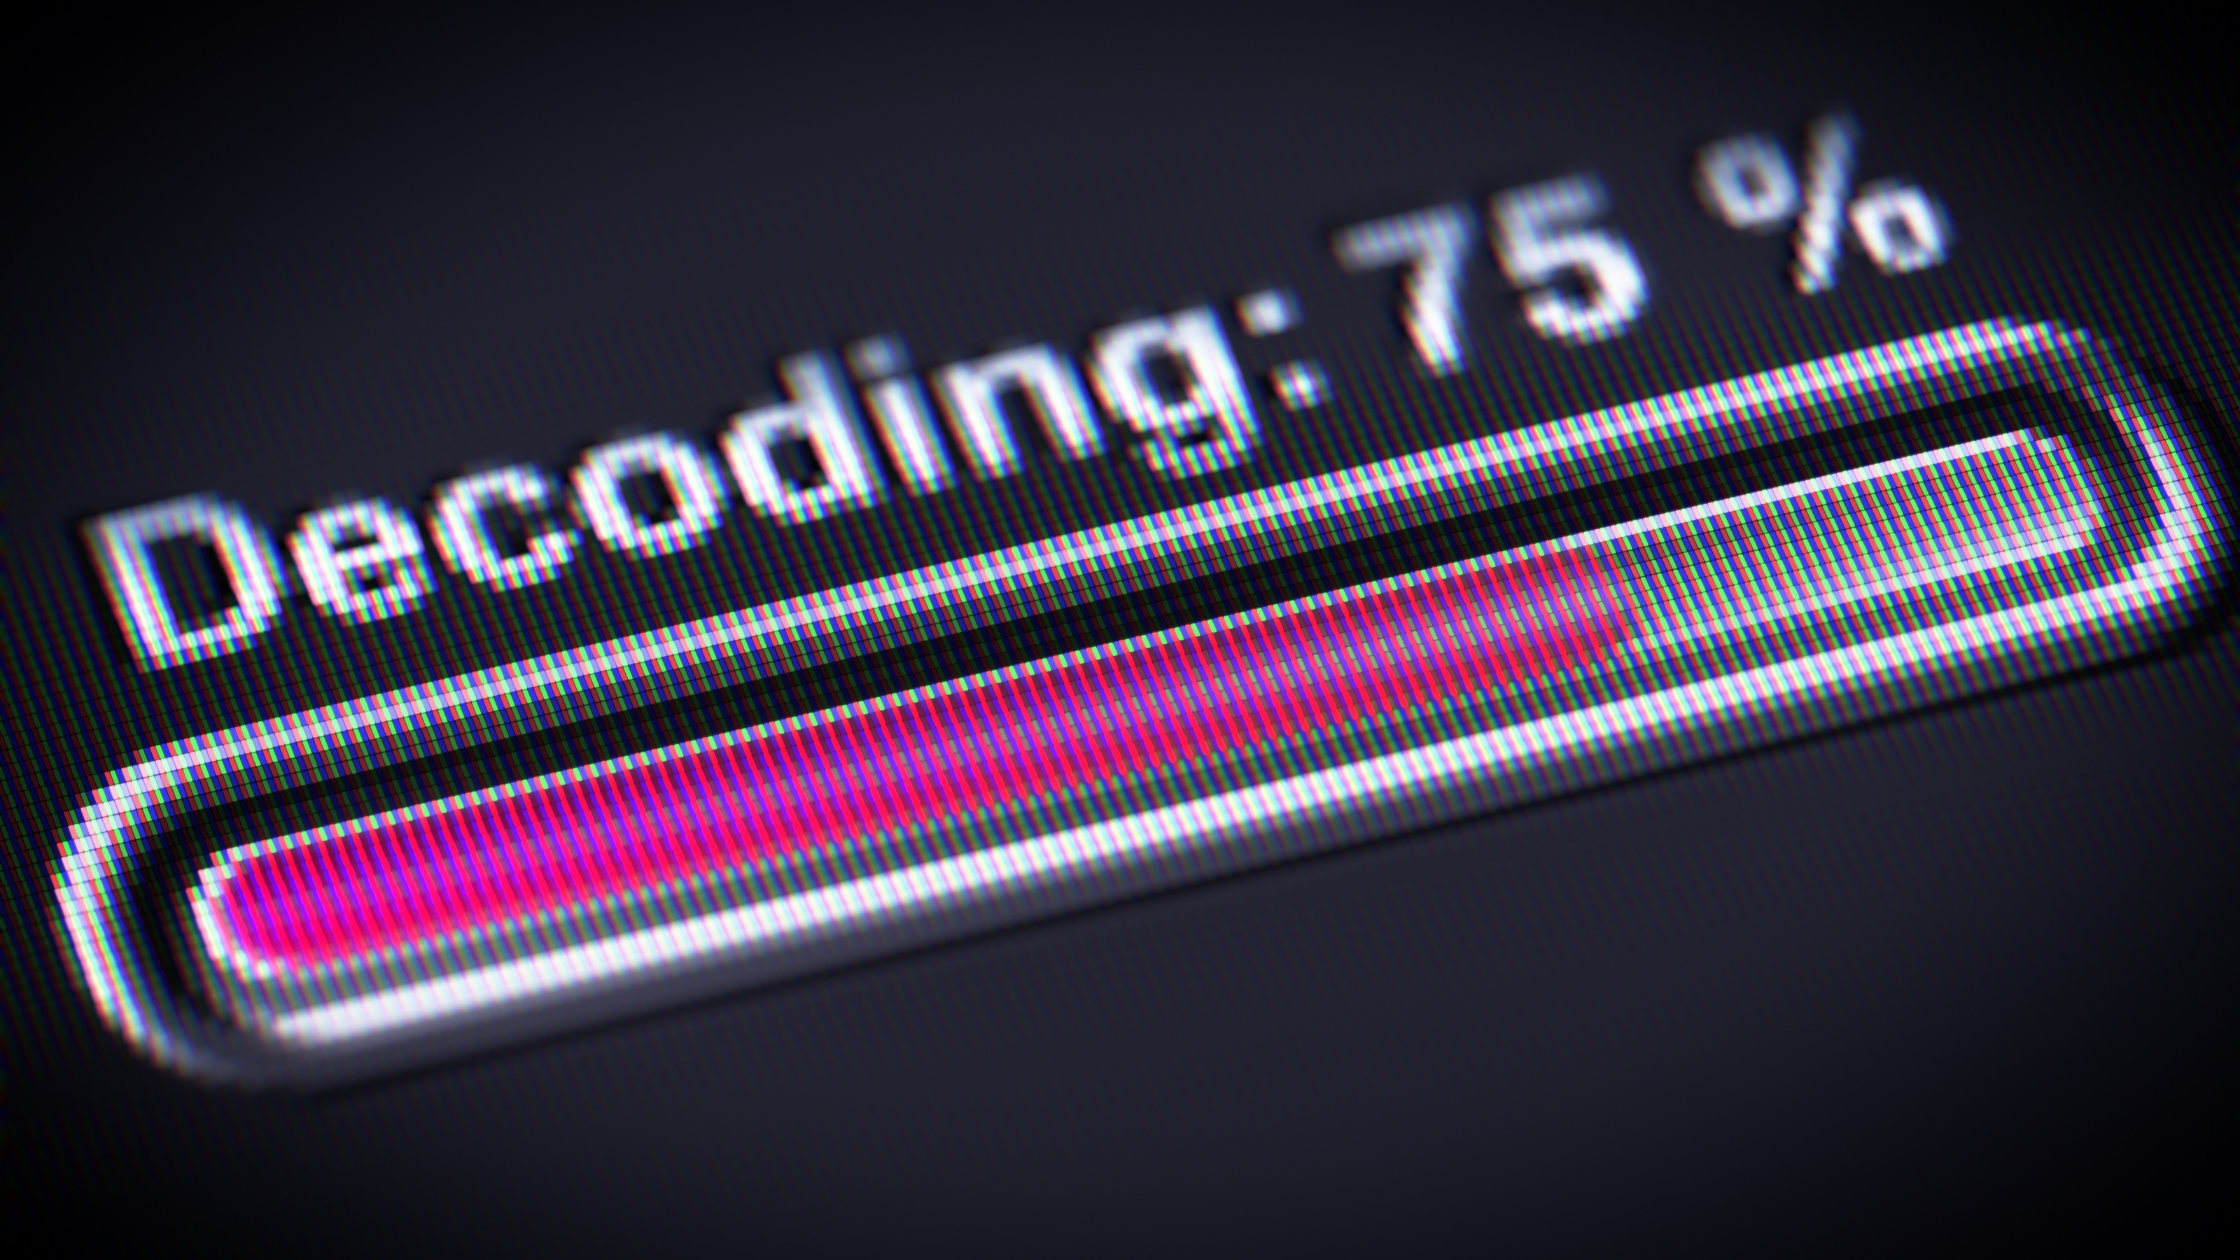 A close-up of a digital decoding progress bar showing 75 percent completion on a dark background.